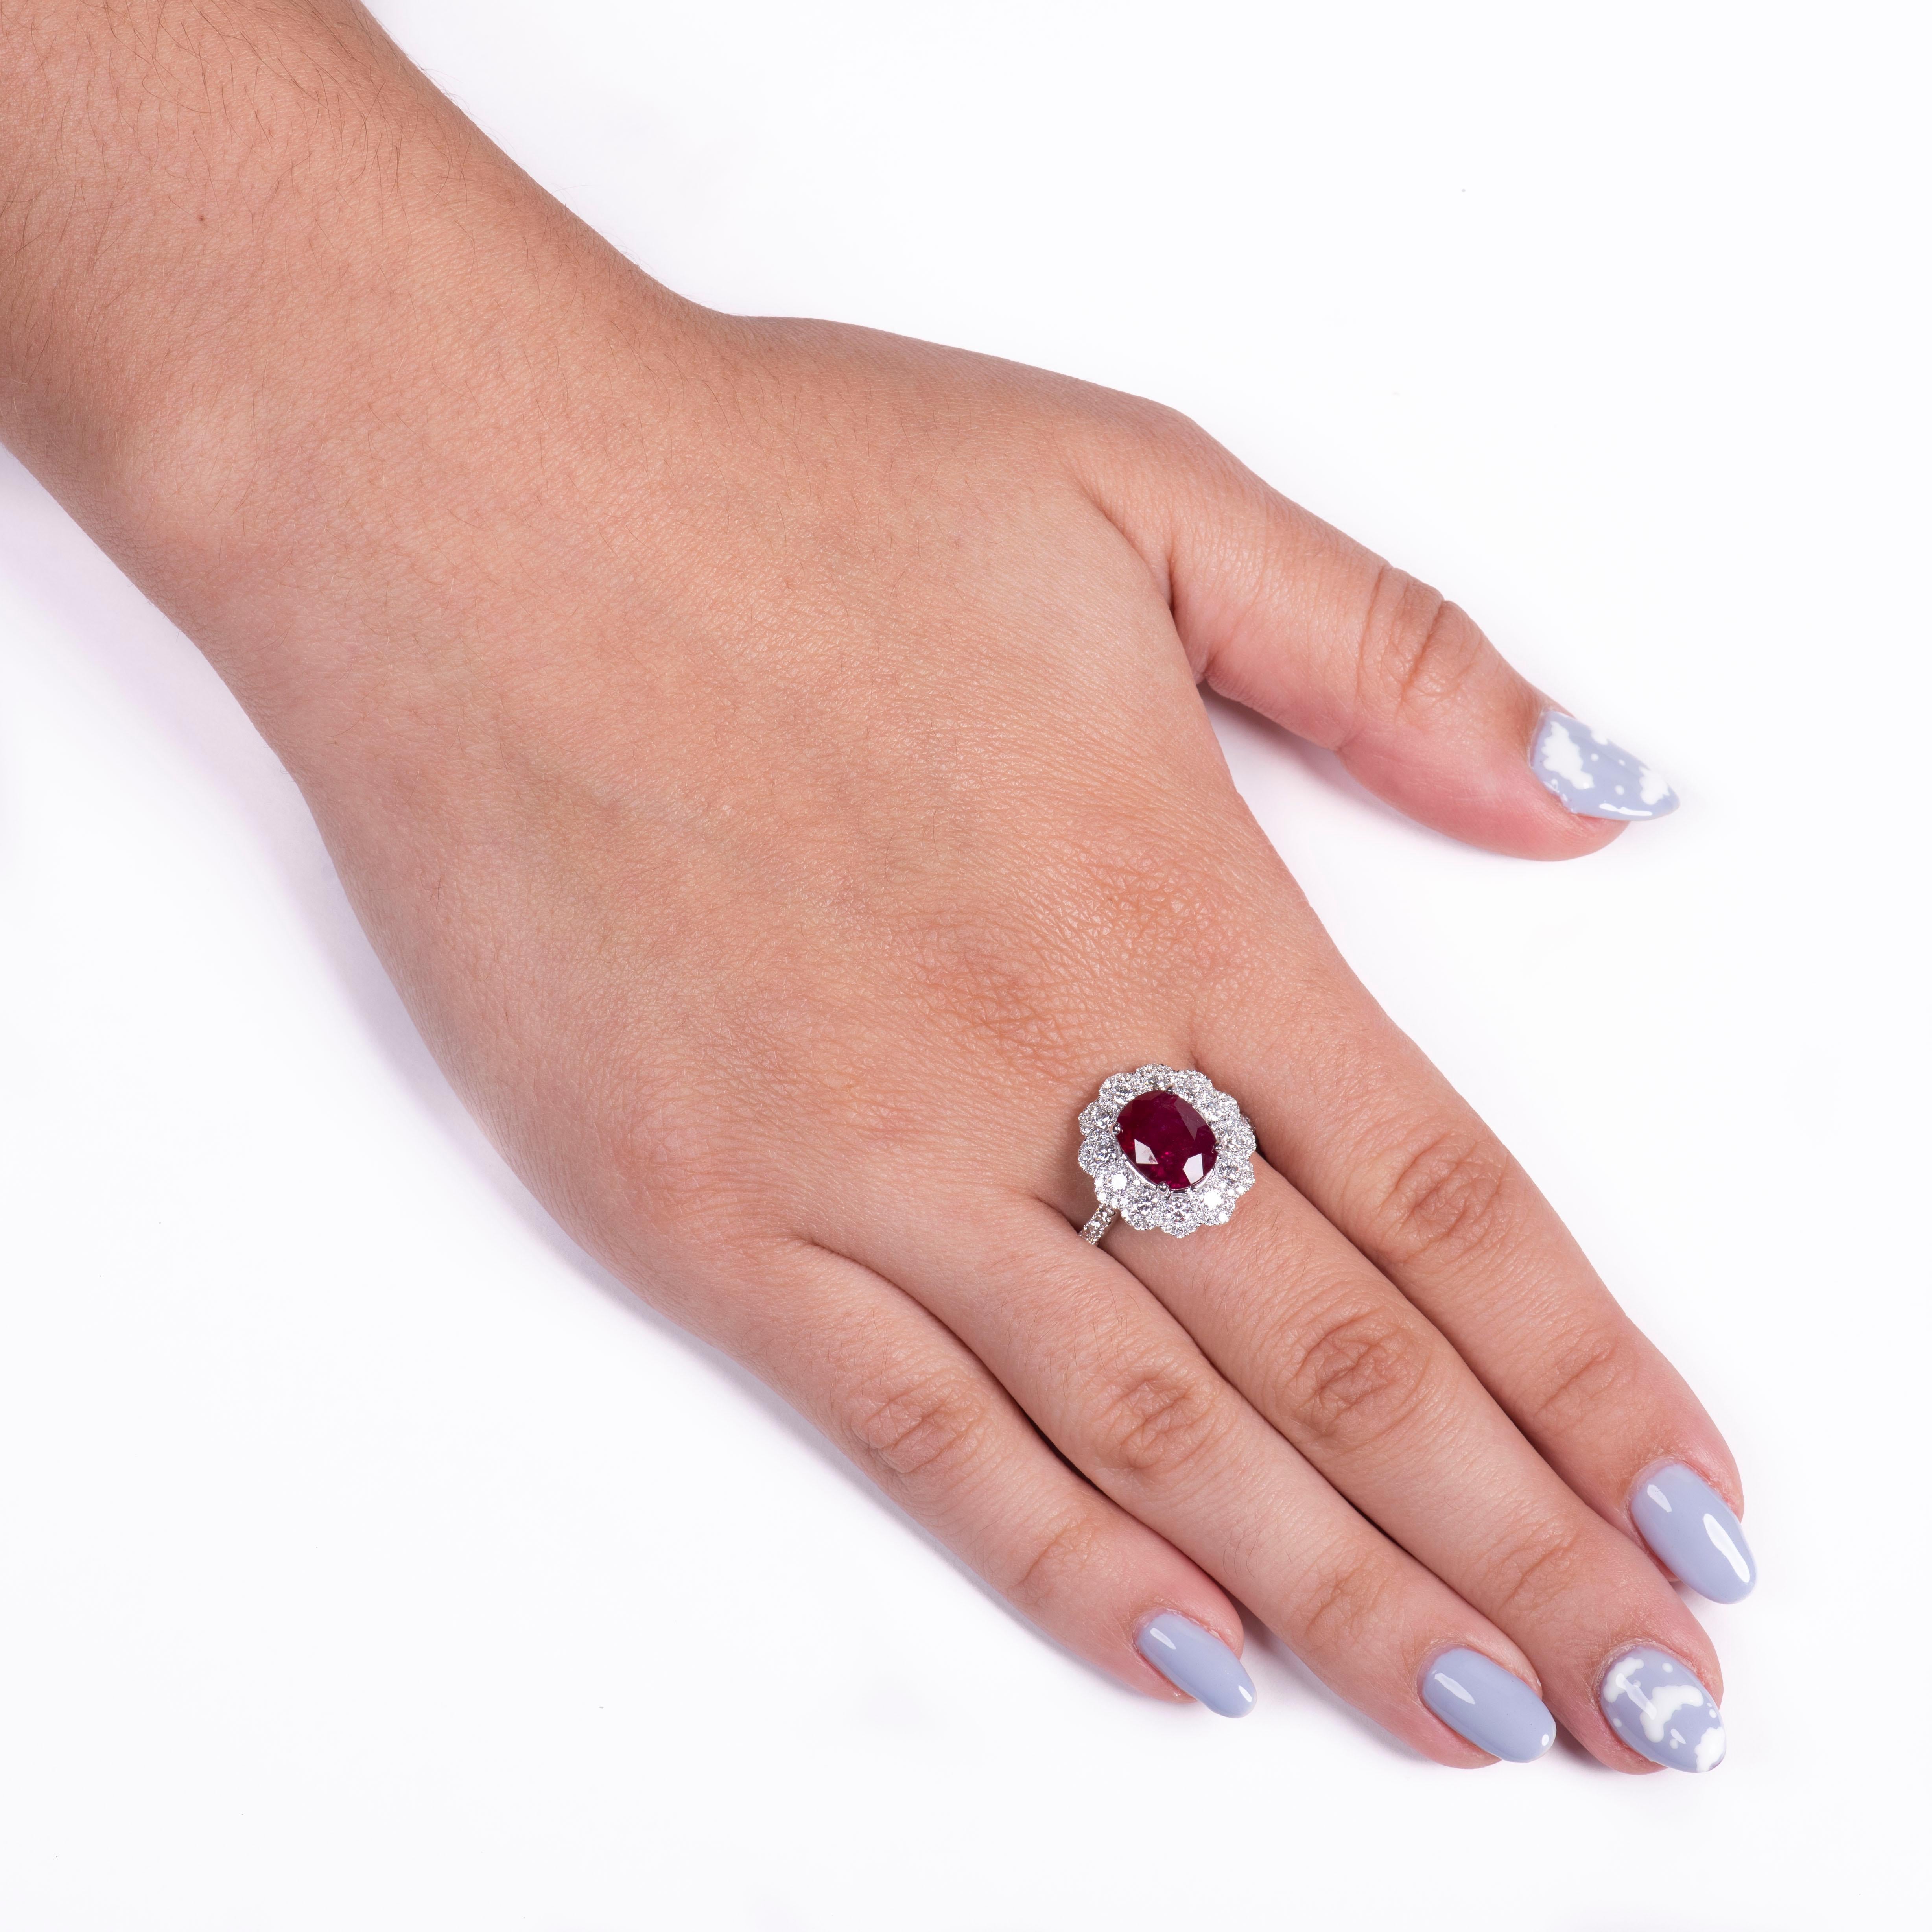 Oval Cut 3.41ct Thai Oval Ruby in 18k White Gold and 1.17ct Round Diamonds, GIA Report